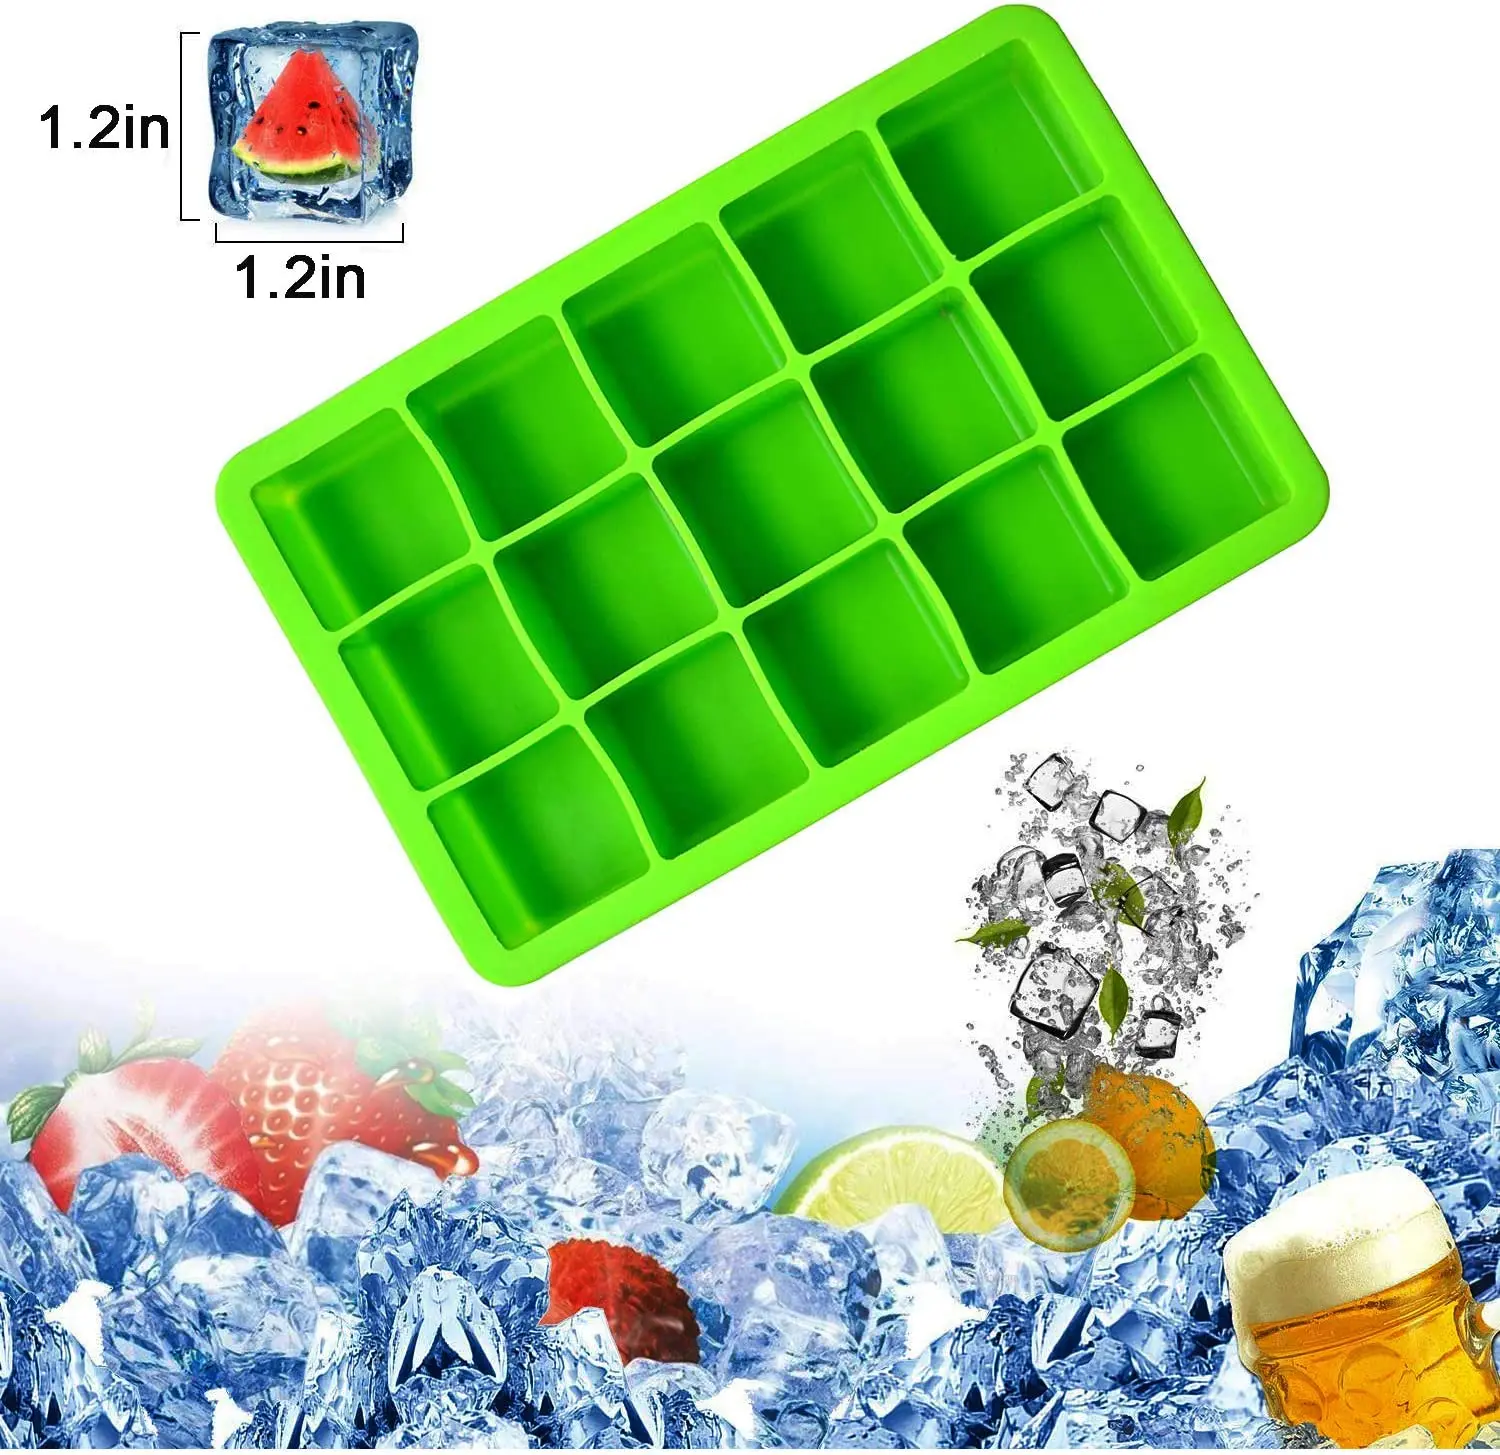 https://ae01.alicdn.com/kf/He9f8f38655fa4e98b9ddc99fd98c7b3ed/Ice-Tray-Silicone-Mold-Ice-Cube-Ice-Cube-Tray-1-25IN-Square-Ice-Cube-Tray-Kitchen.jpg